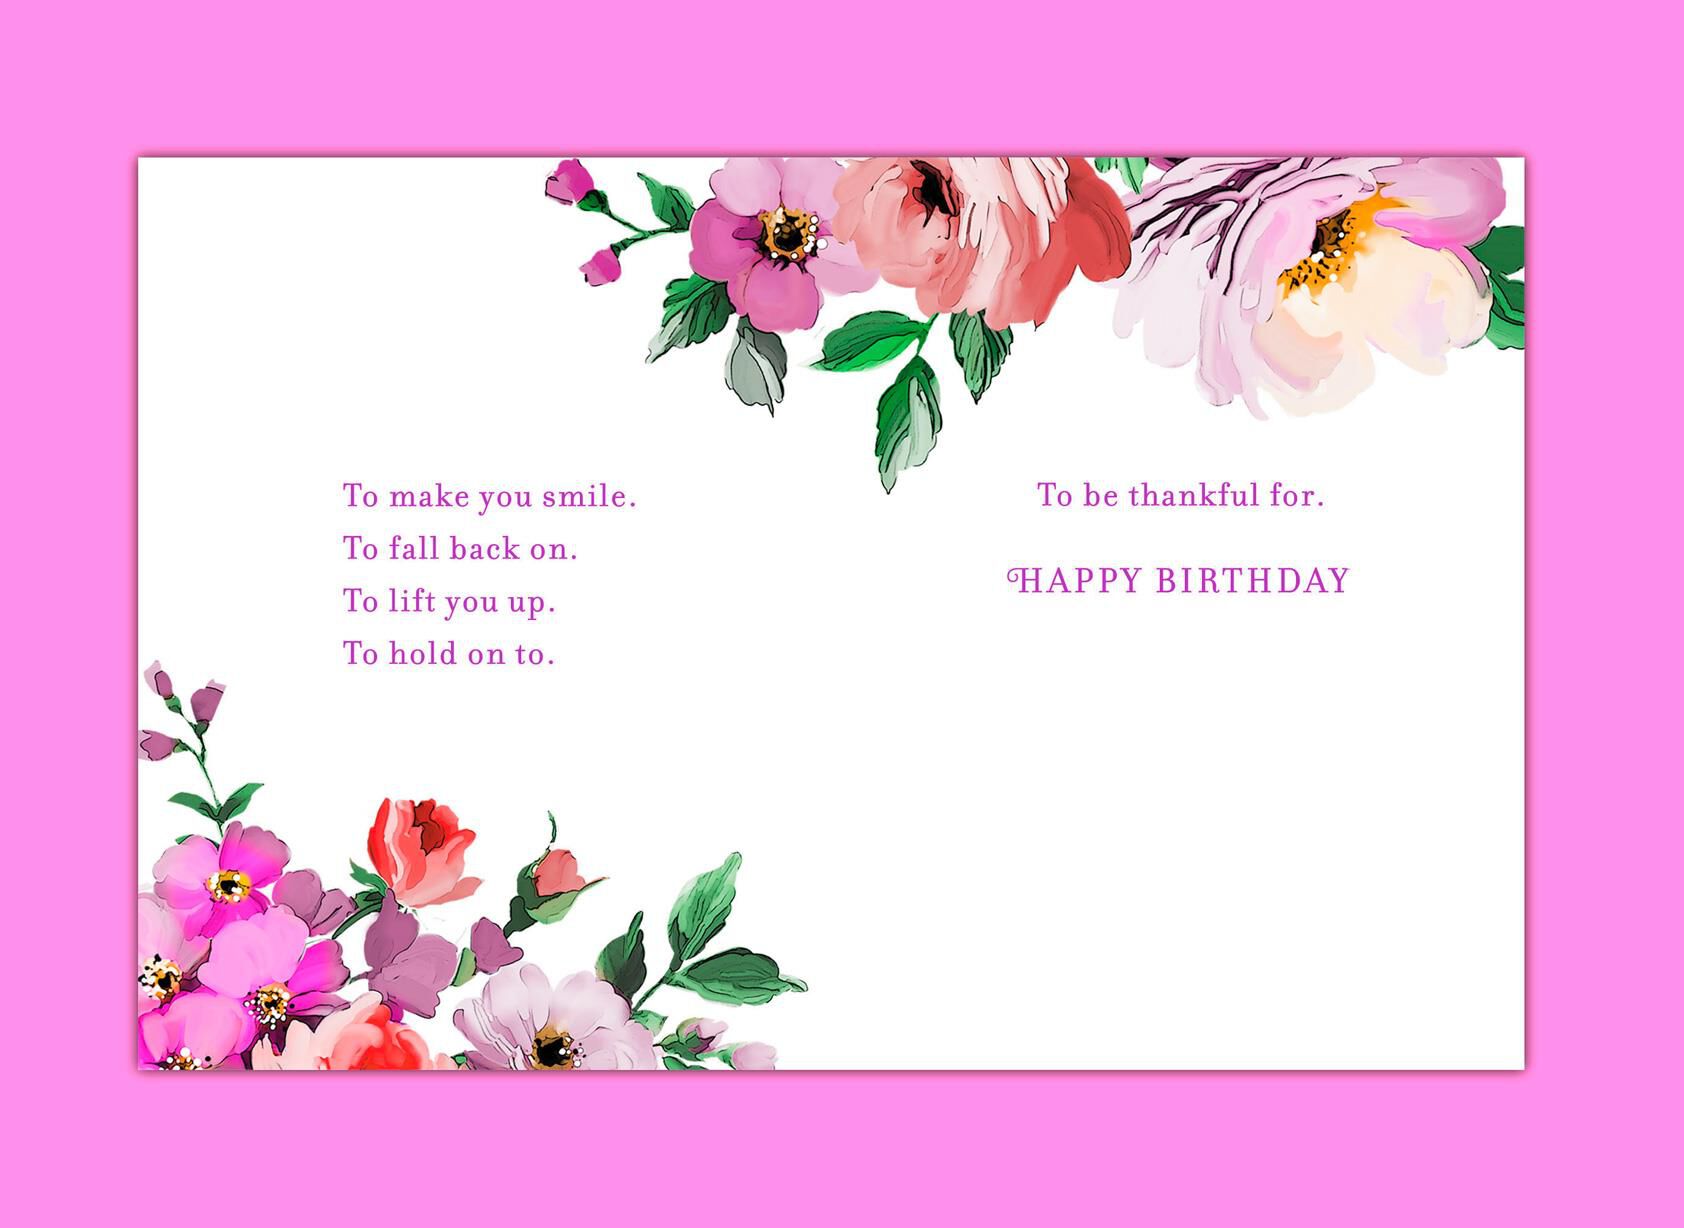 22 Of the Best Ideas for Free Printable Hallmark Birthday Cards Home